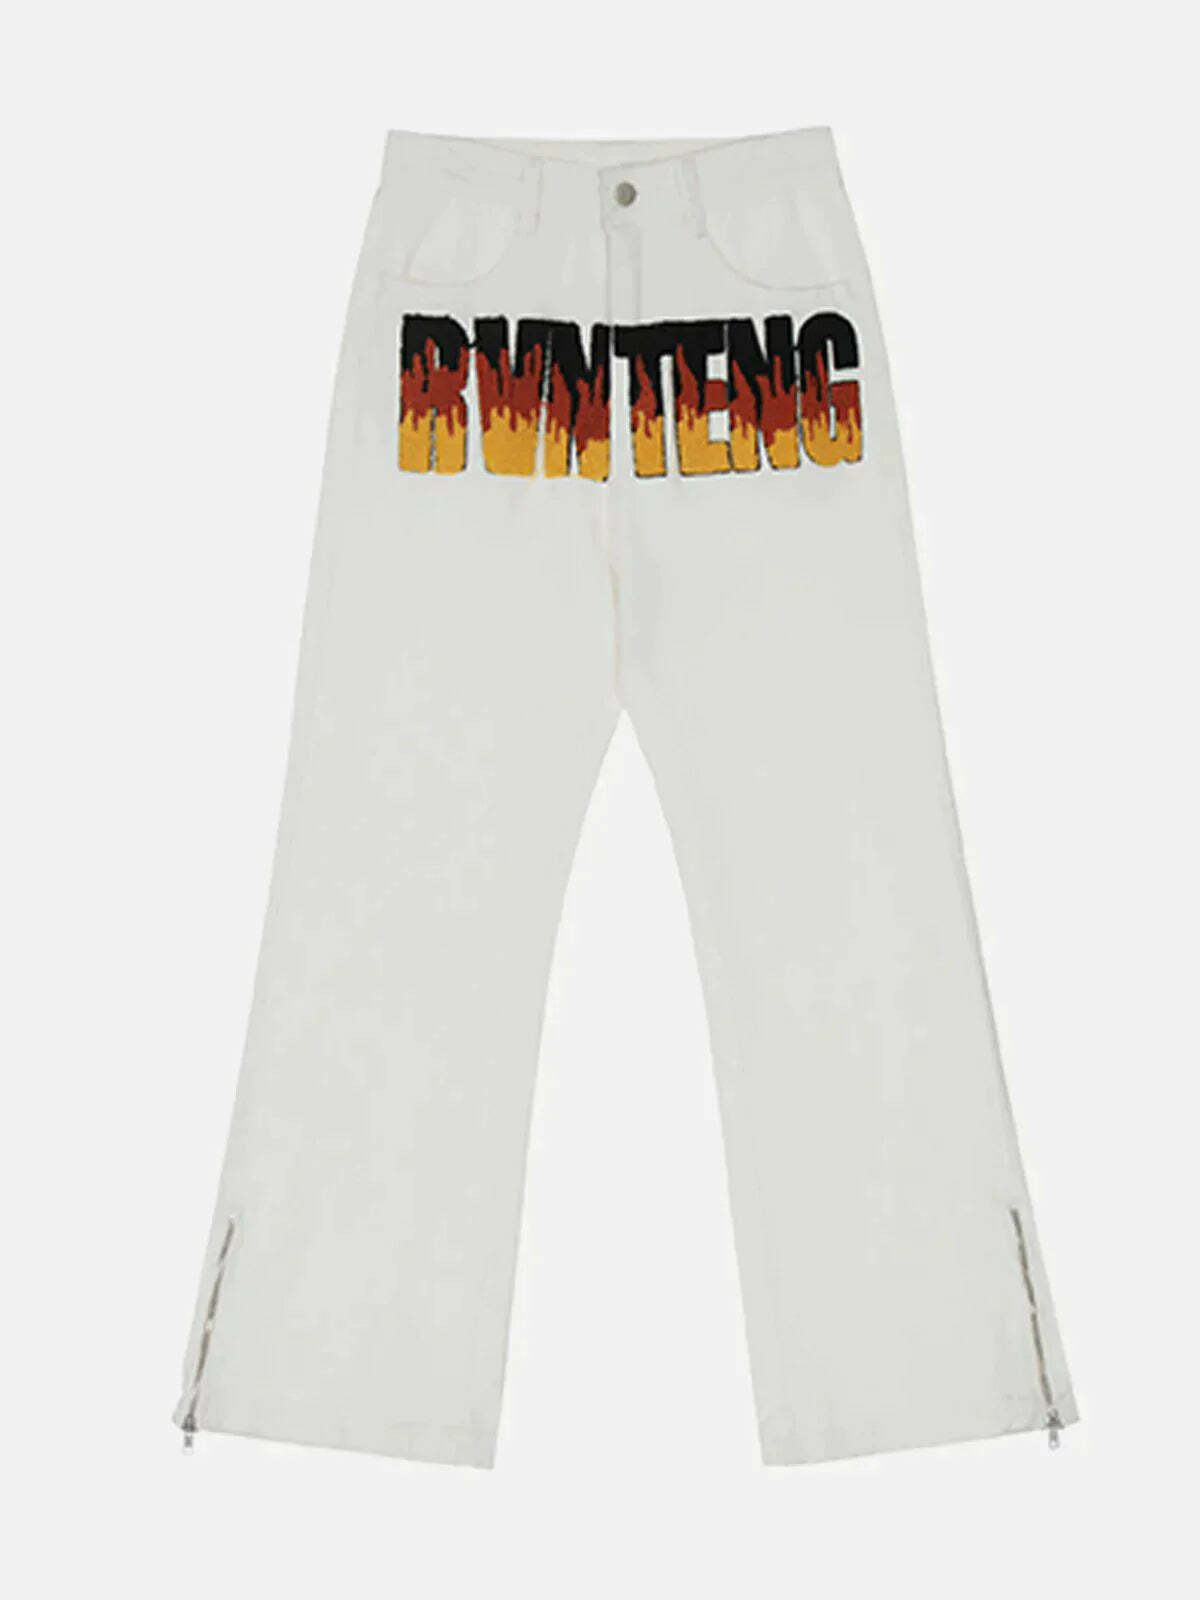 embroidered flame alphabet jeans edgy & y2k streetwear 4100